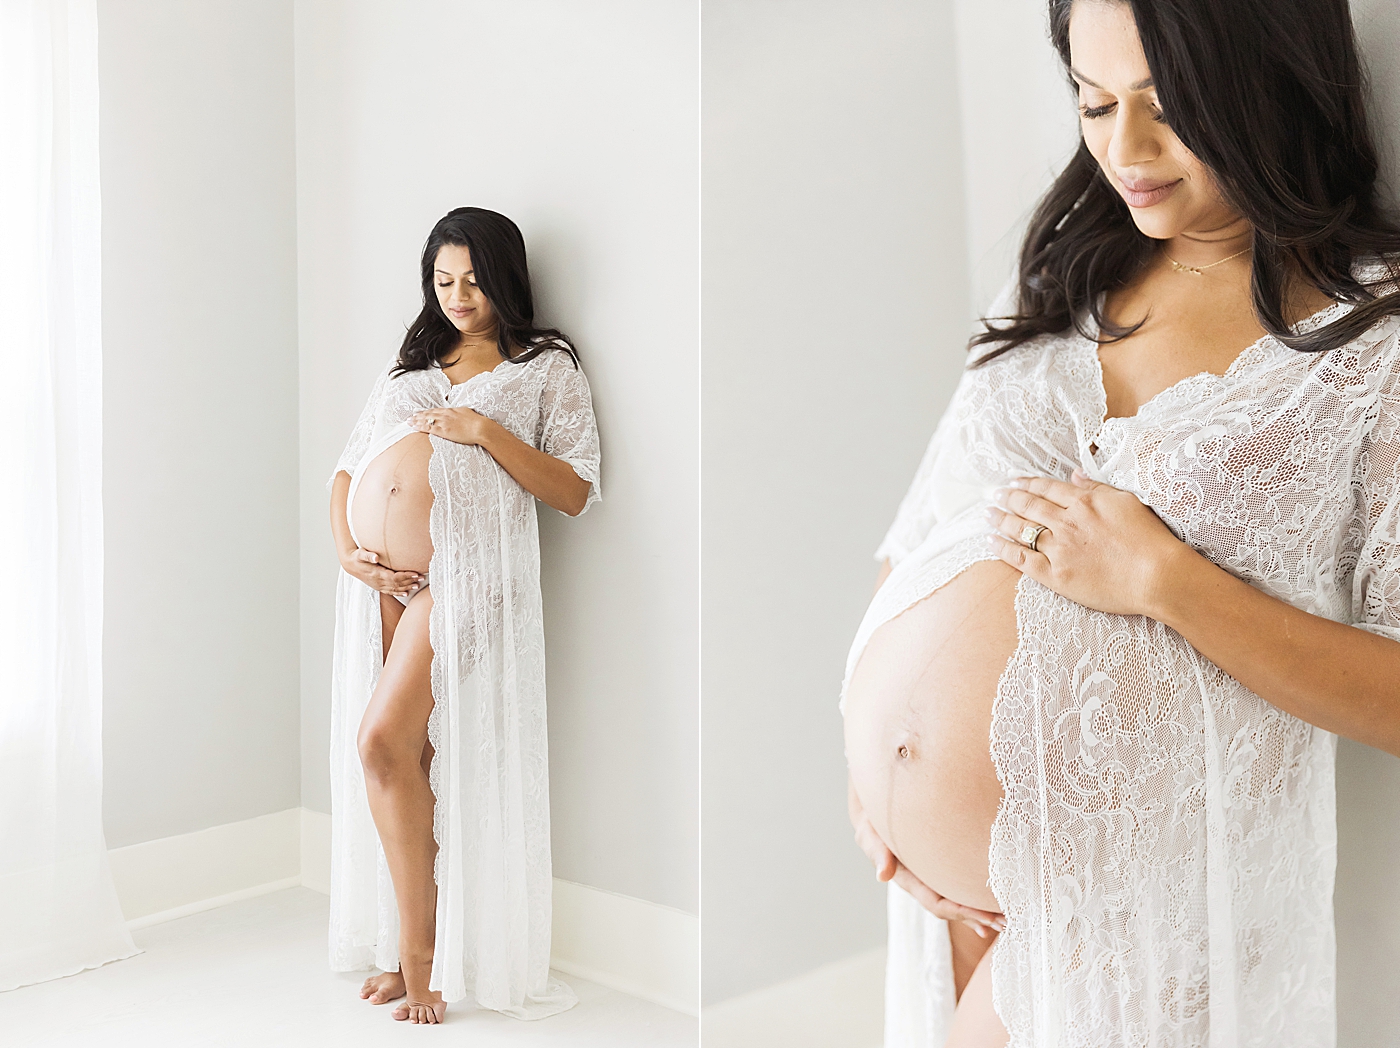 Twin maternity session in Houston Heights studio with Fresh Light Photography.